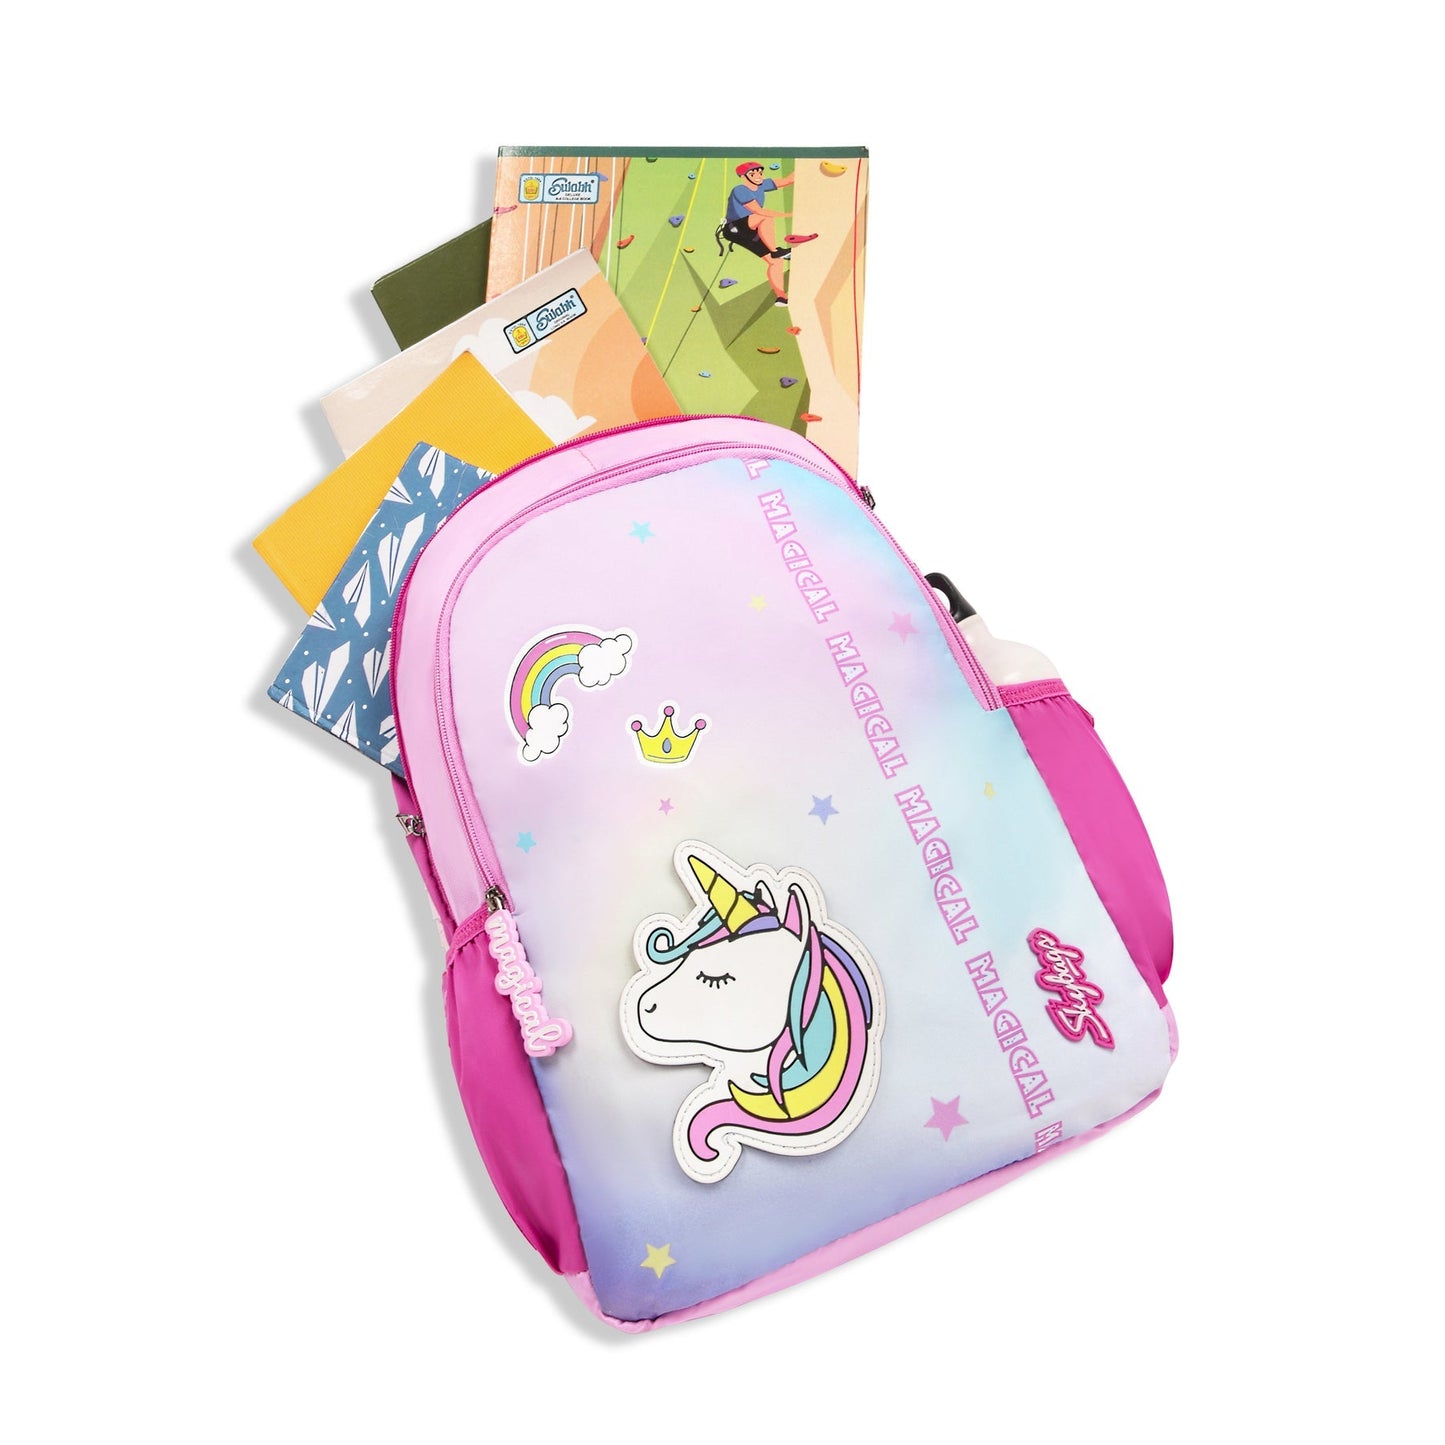 Skybags Bubbles Unicorn 03 18L Backpack